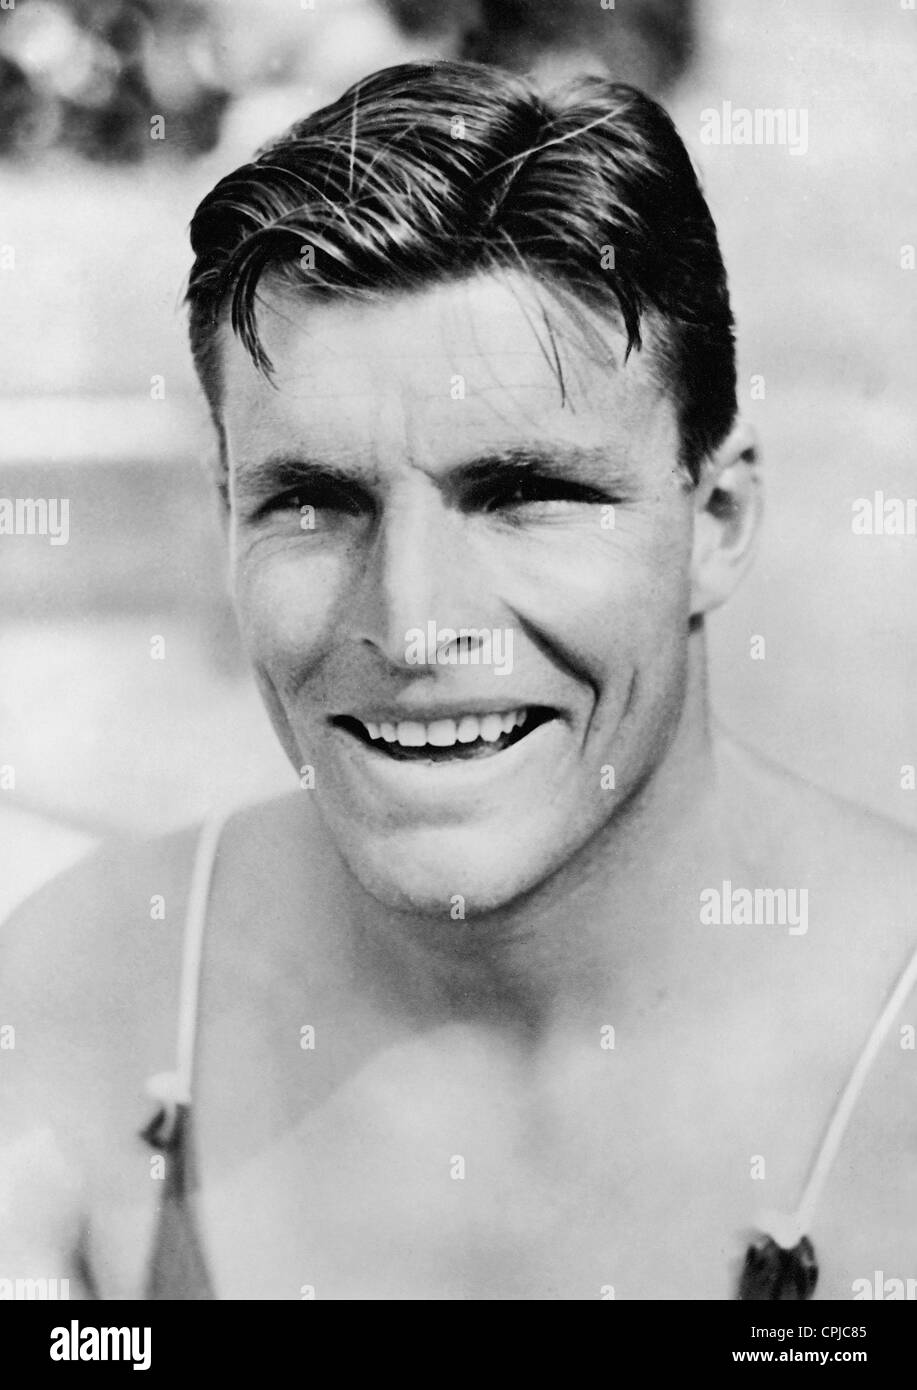 Image result for Buster Crabbe - 1932 olympic Games